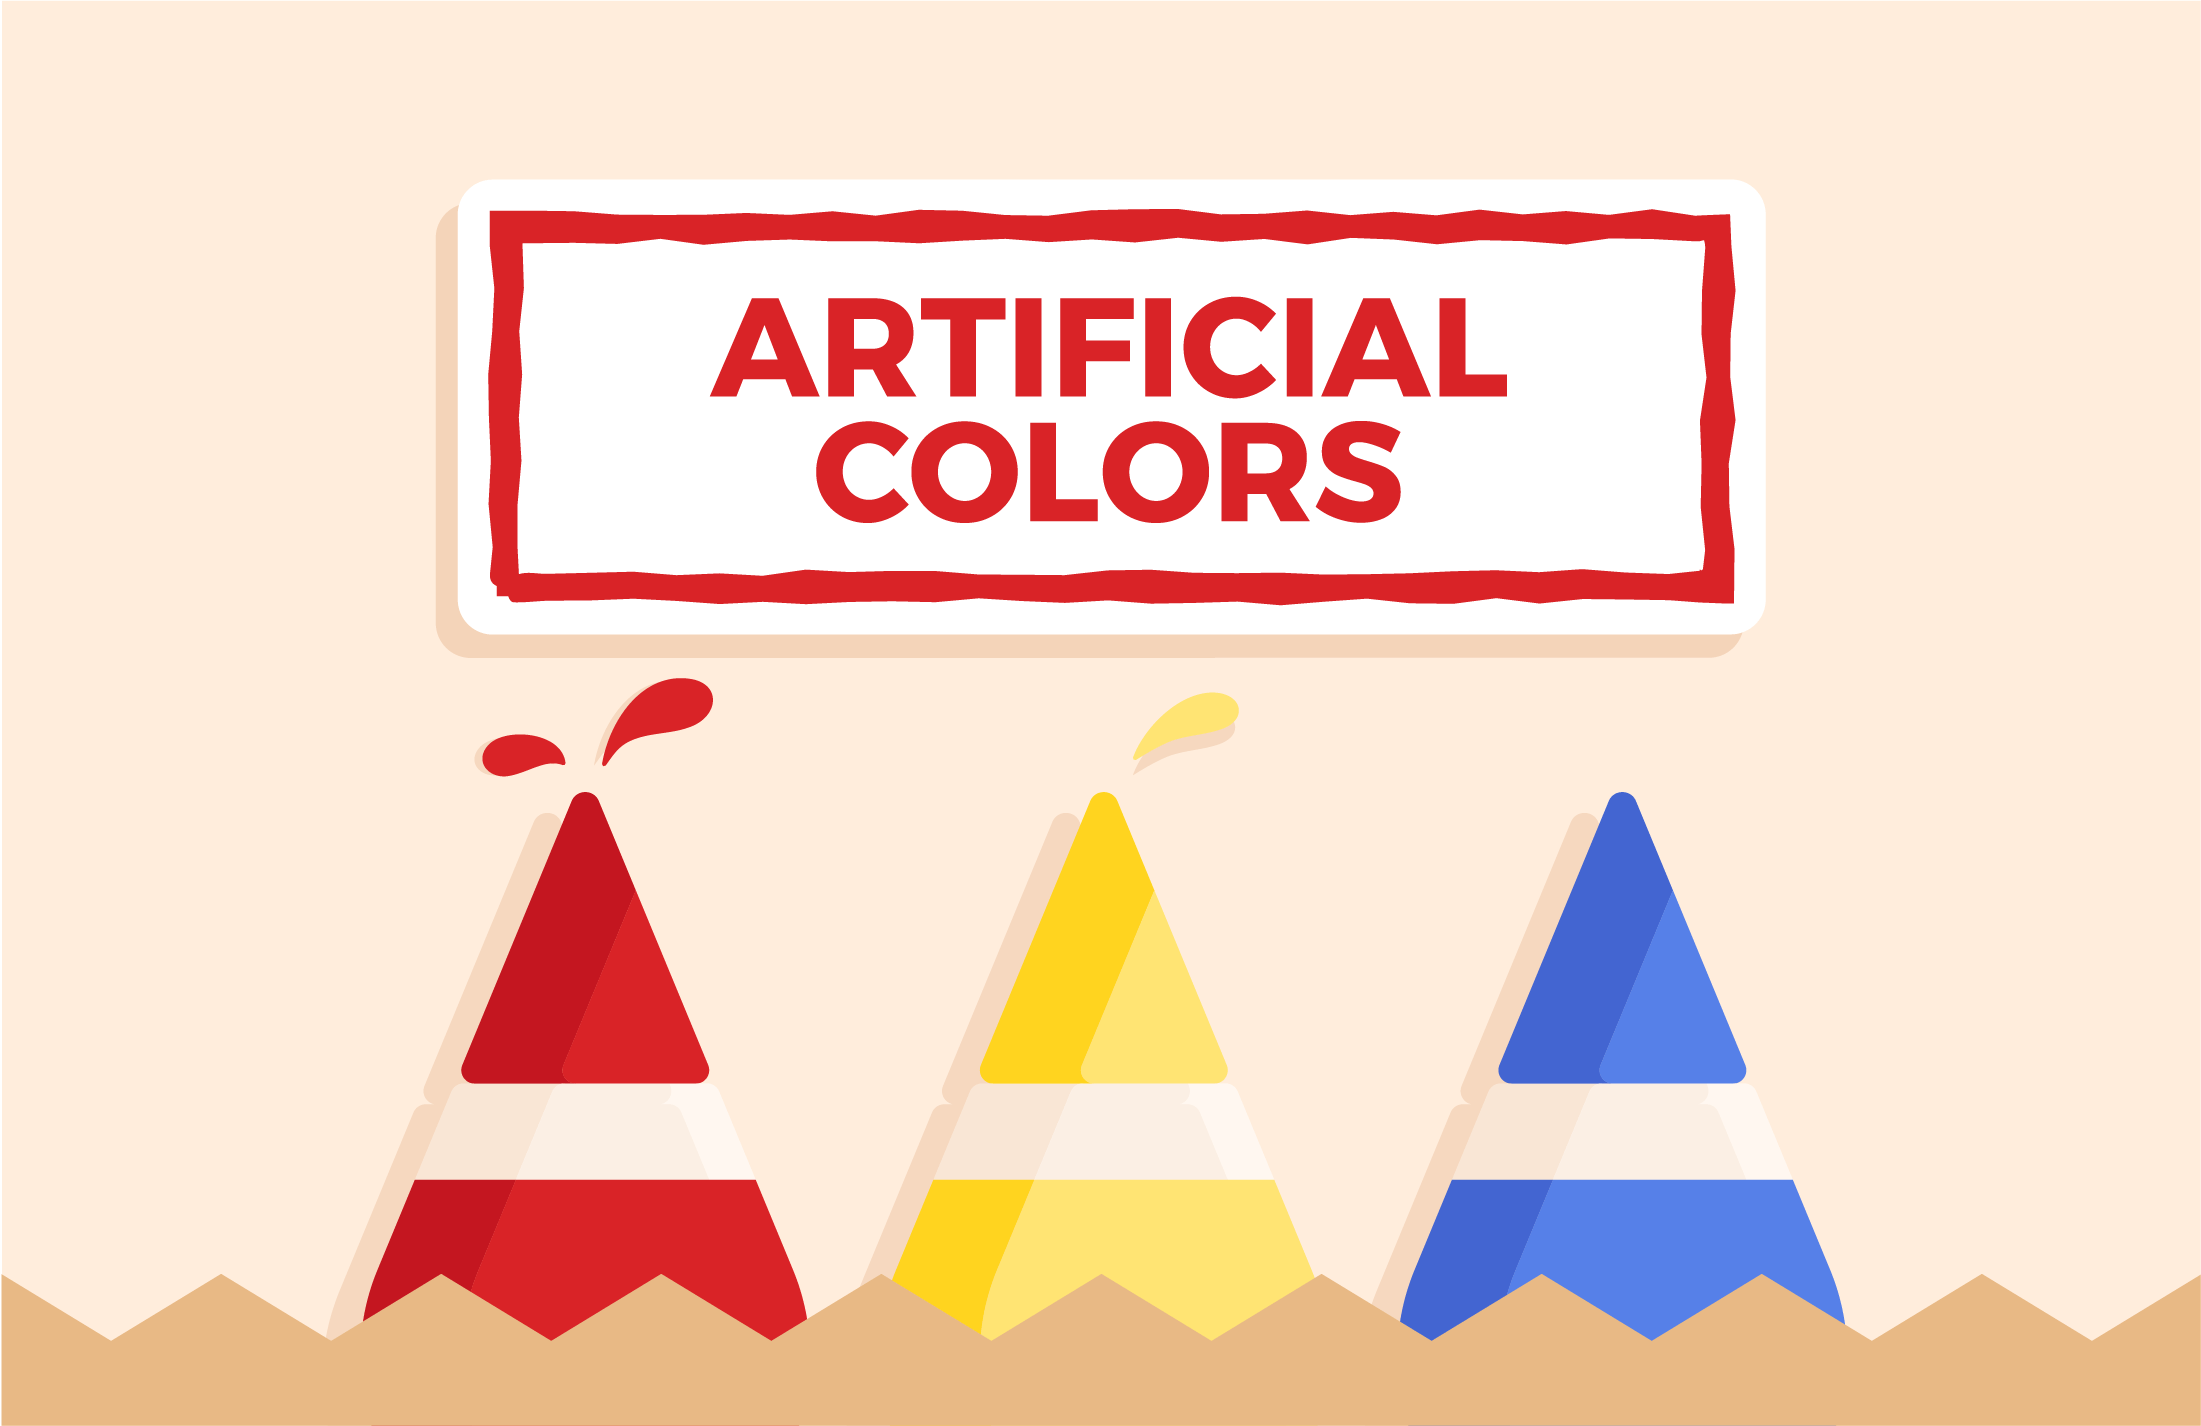 Artificial Colors. Three vials of artificial food coloring in red, yellow, and blue. Illustration.